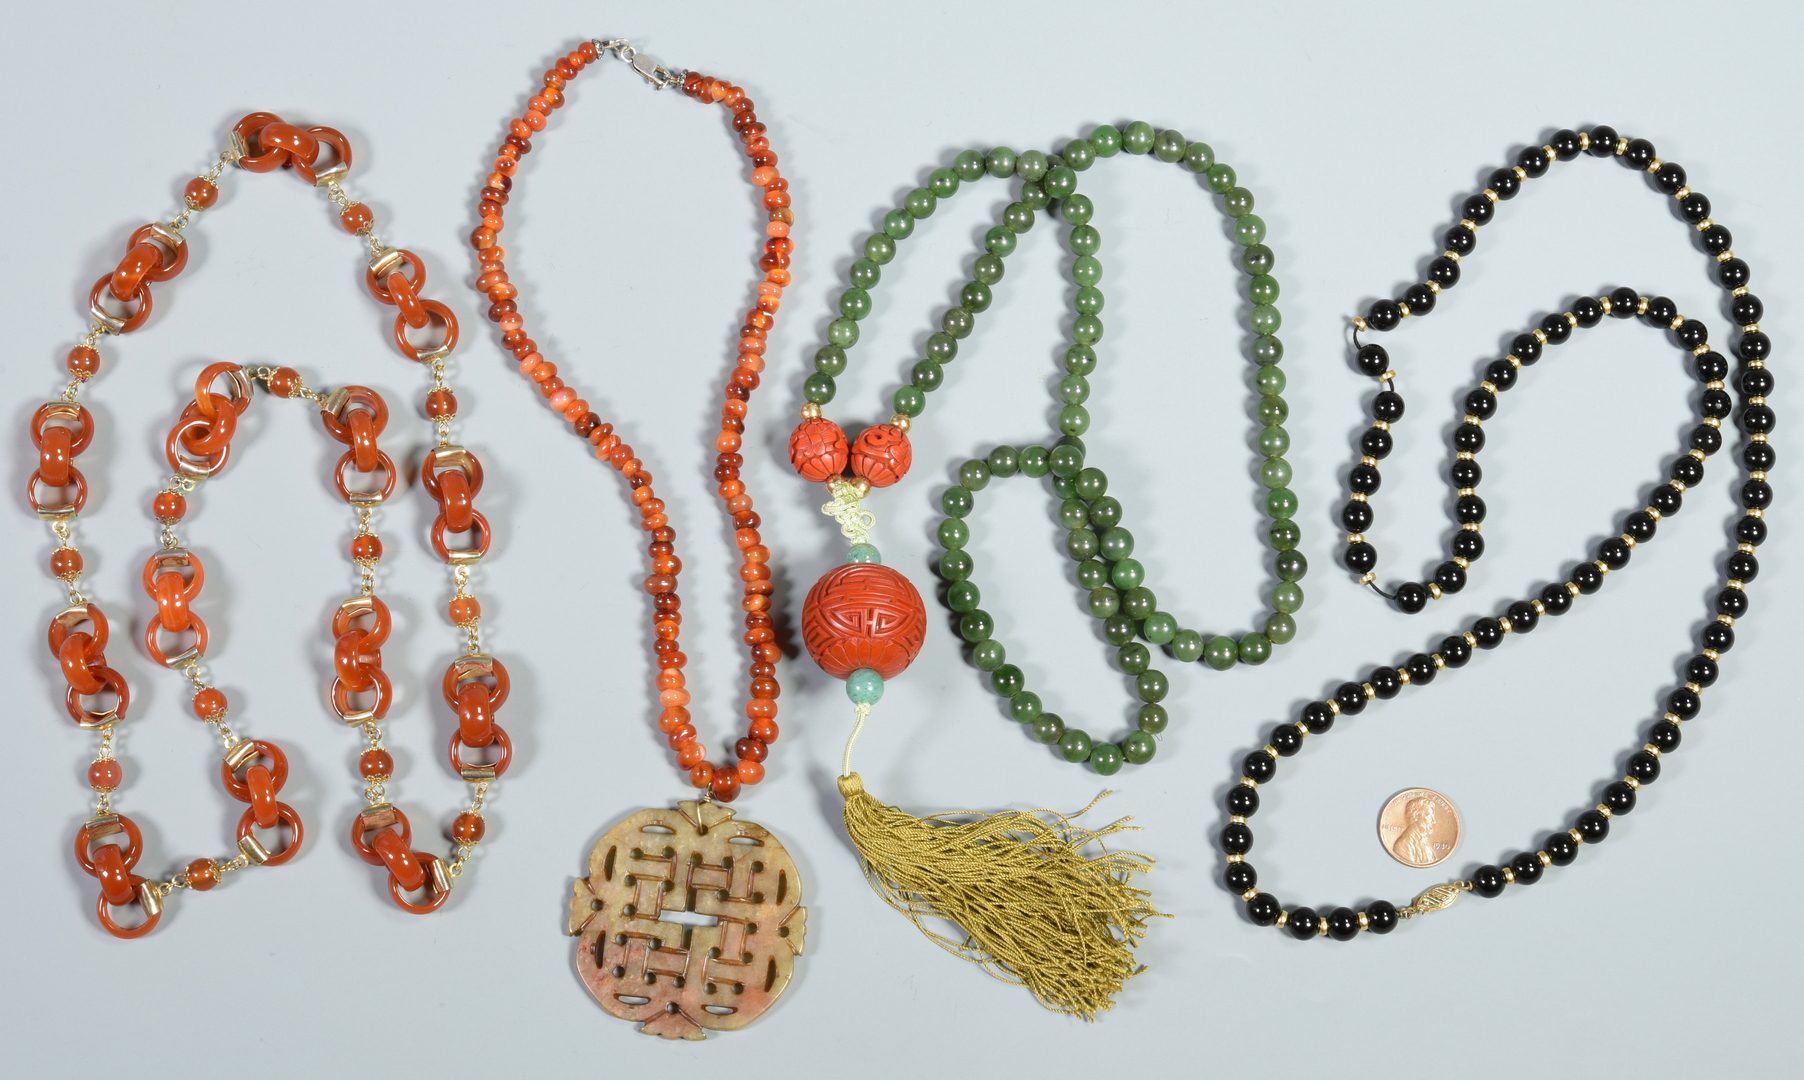 Lot 39: Chinese Carved and/or Beaded Necklaces